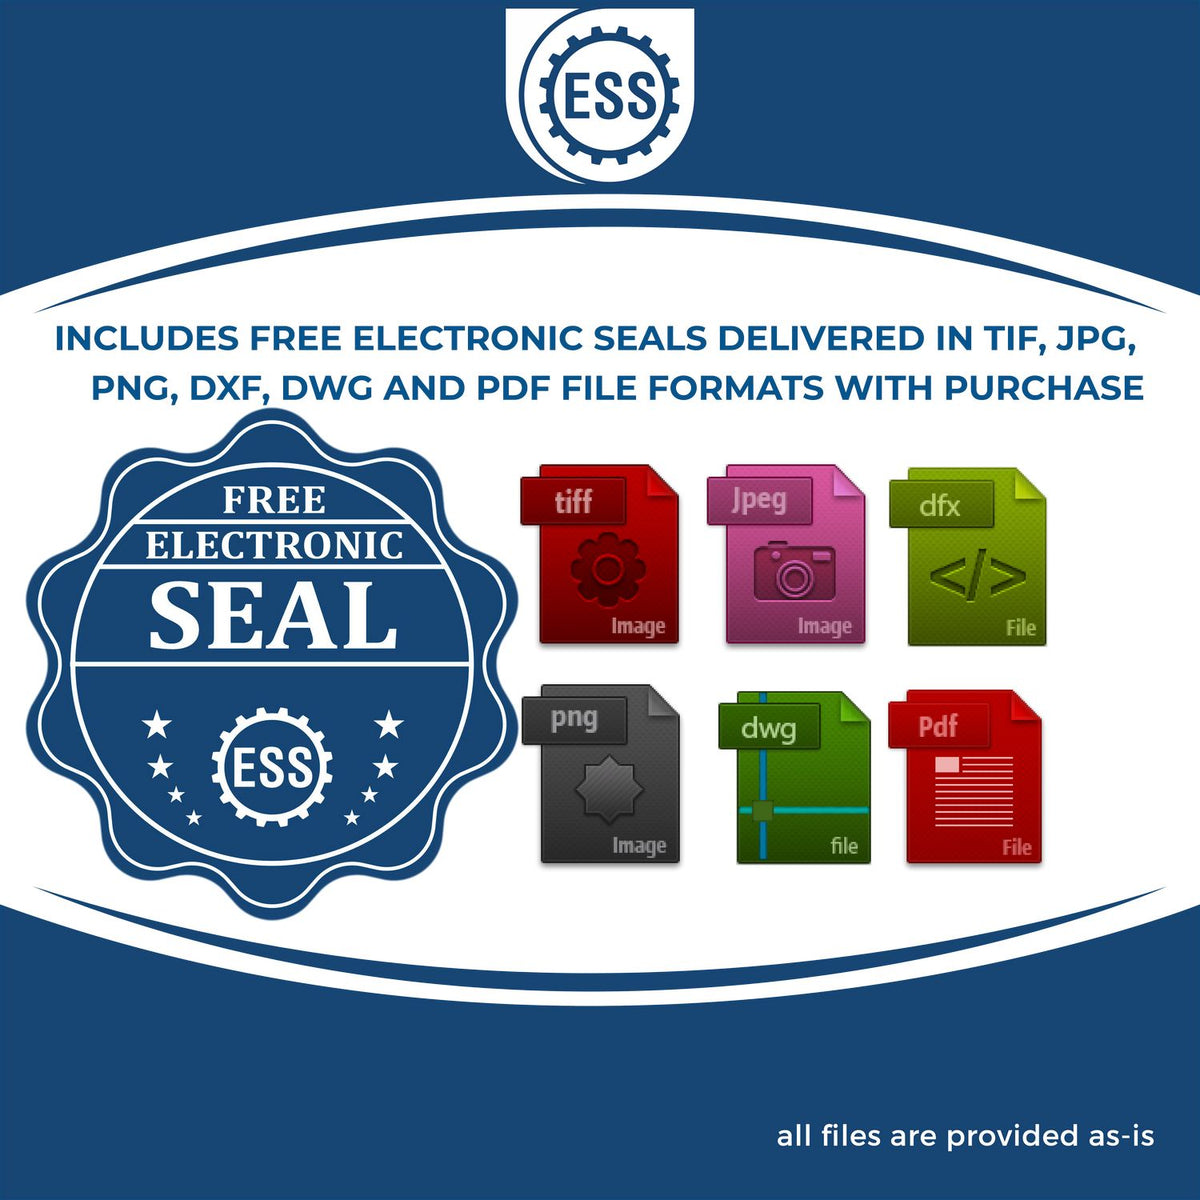 An infographic for the free electronic seal for the Slim Pre-Inked New Mexico Land Surveyor Seal Stamp illustrating the different file type icons such as DXF, DWG, TIF, JPG and PNG.